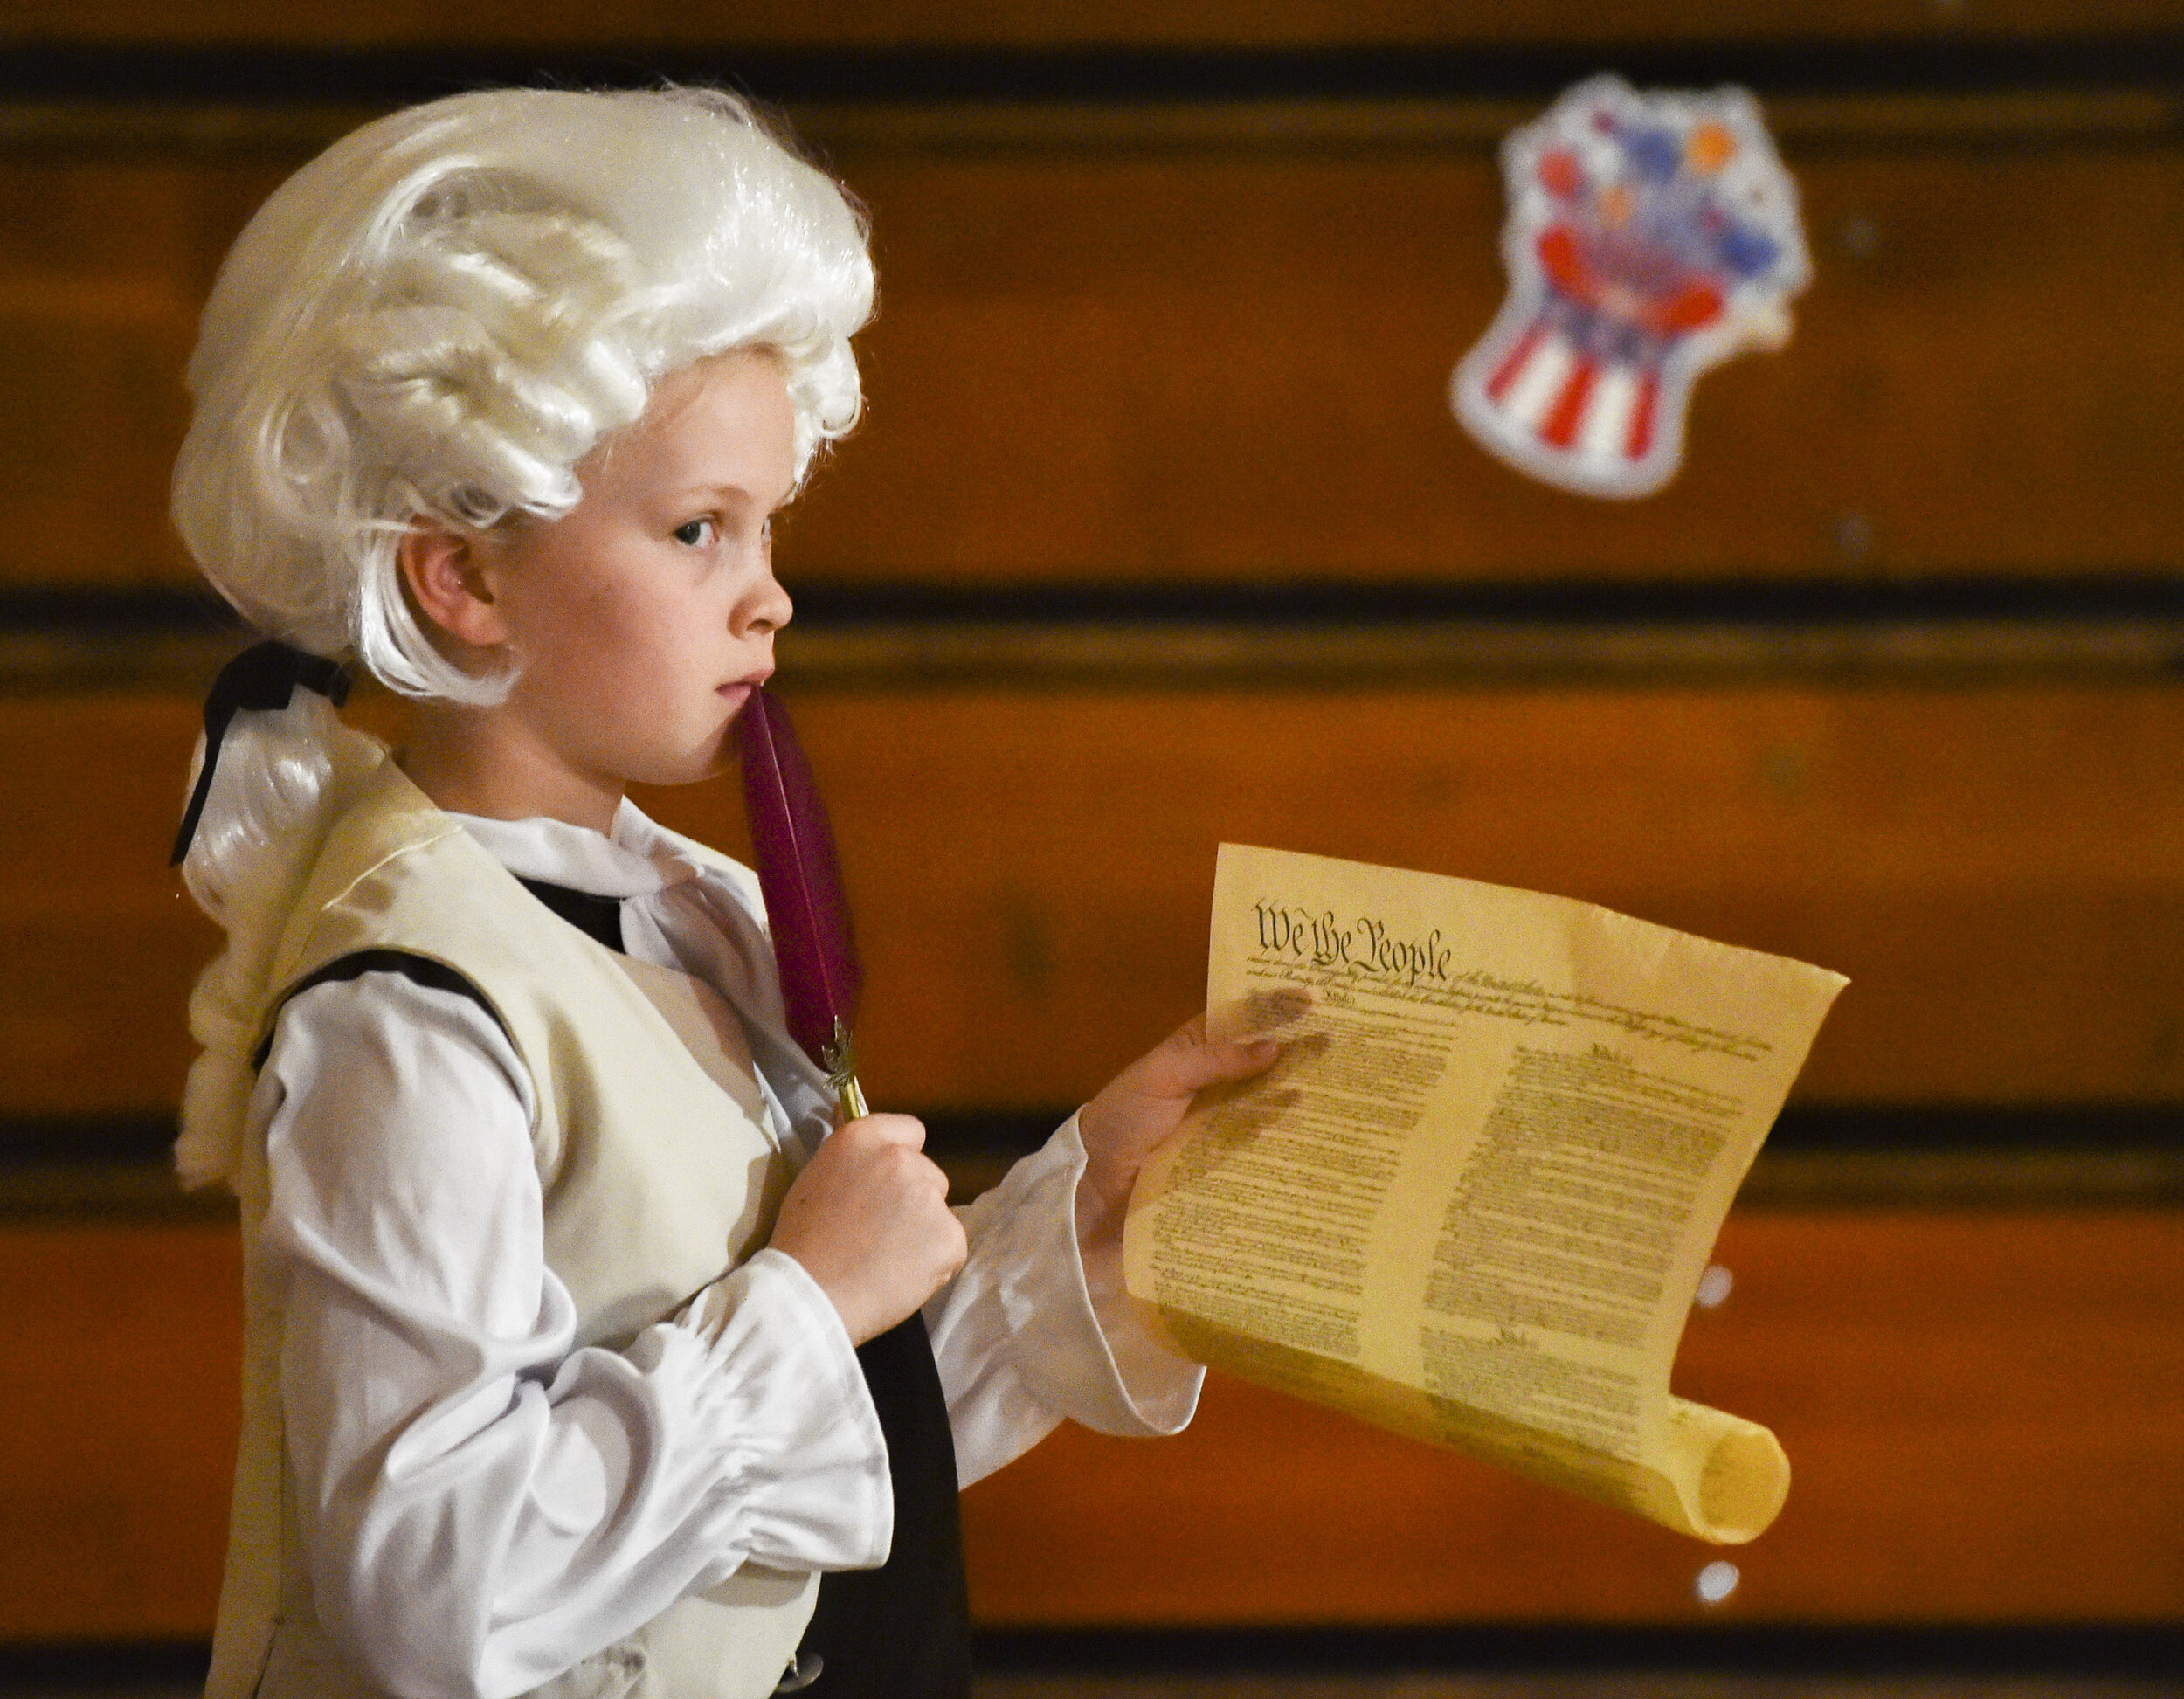  Seton Catholic Elementary School 4th grader ALexis Burkett, stands at the ready to give her presentation about former U.S. President James Madison during the school's 'Presidential Wax Museum' event Thursday, March 1, 2019 in Moline. Every year the 